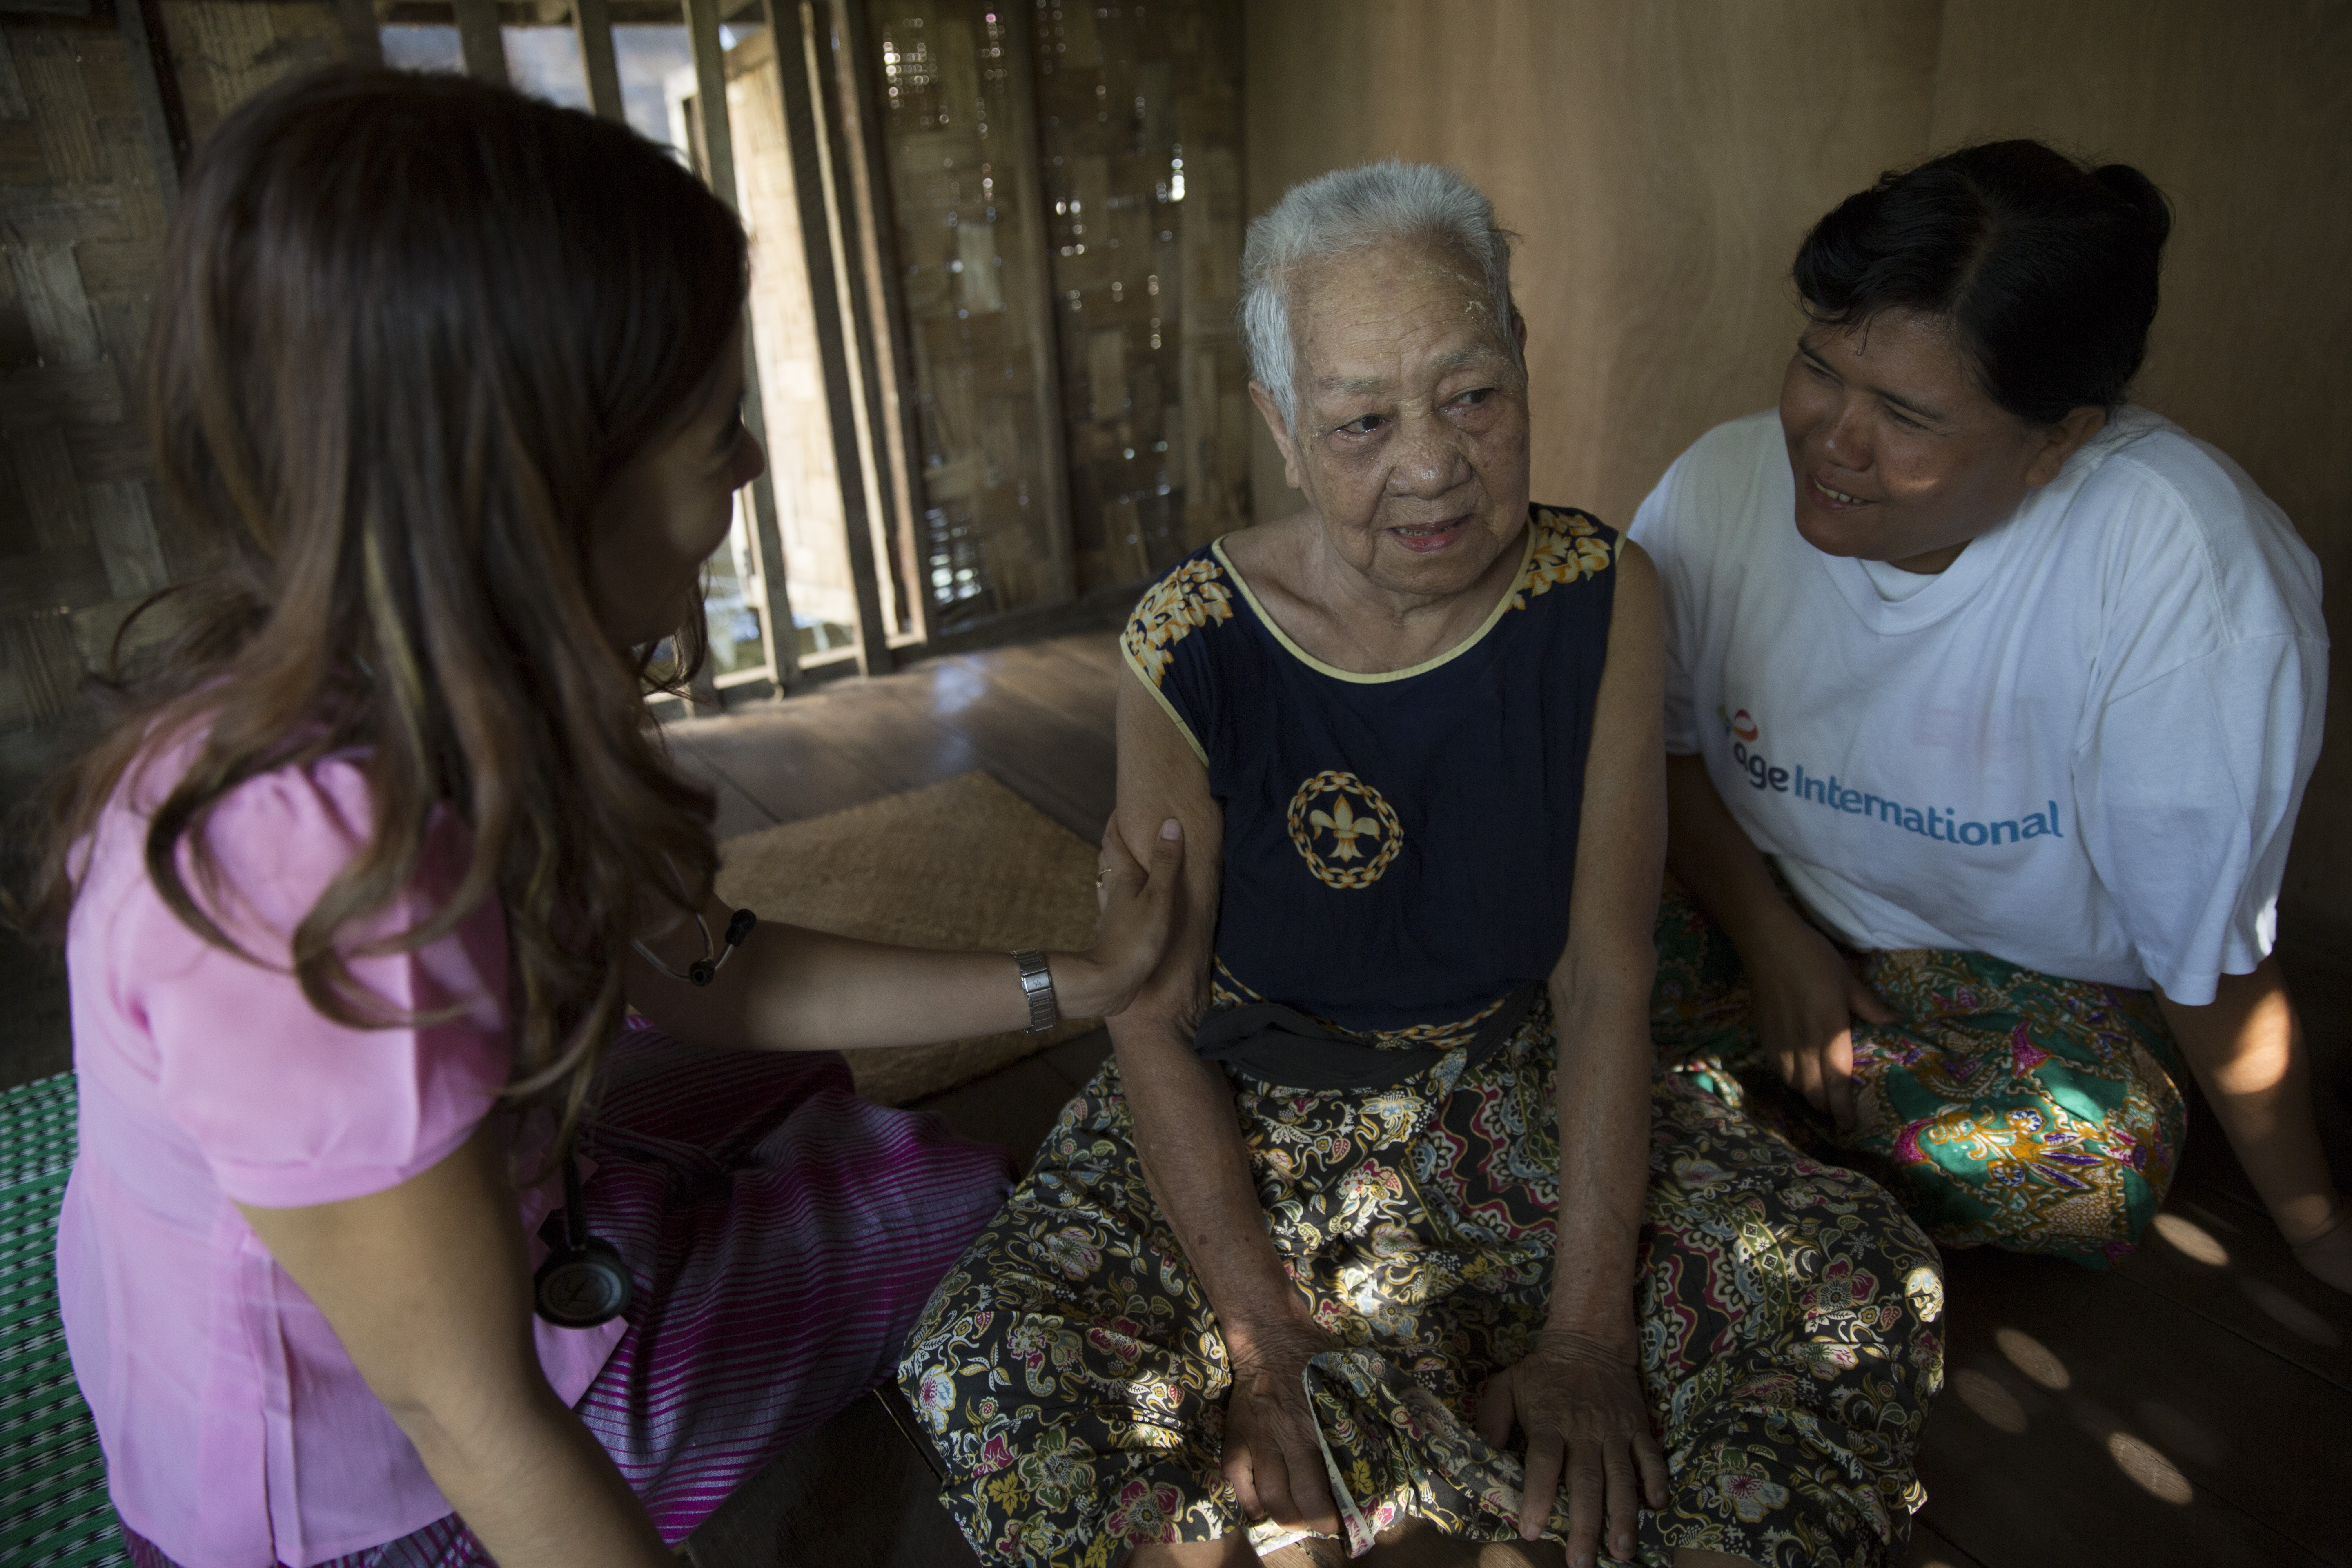 A carer and a doctor sit around an older woman with dementia in Myanmar.